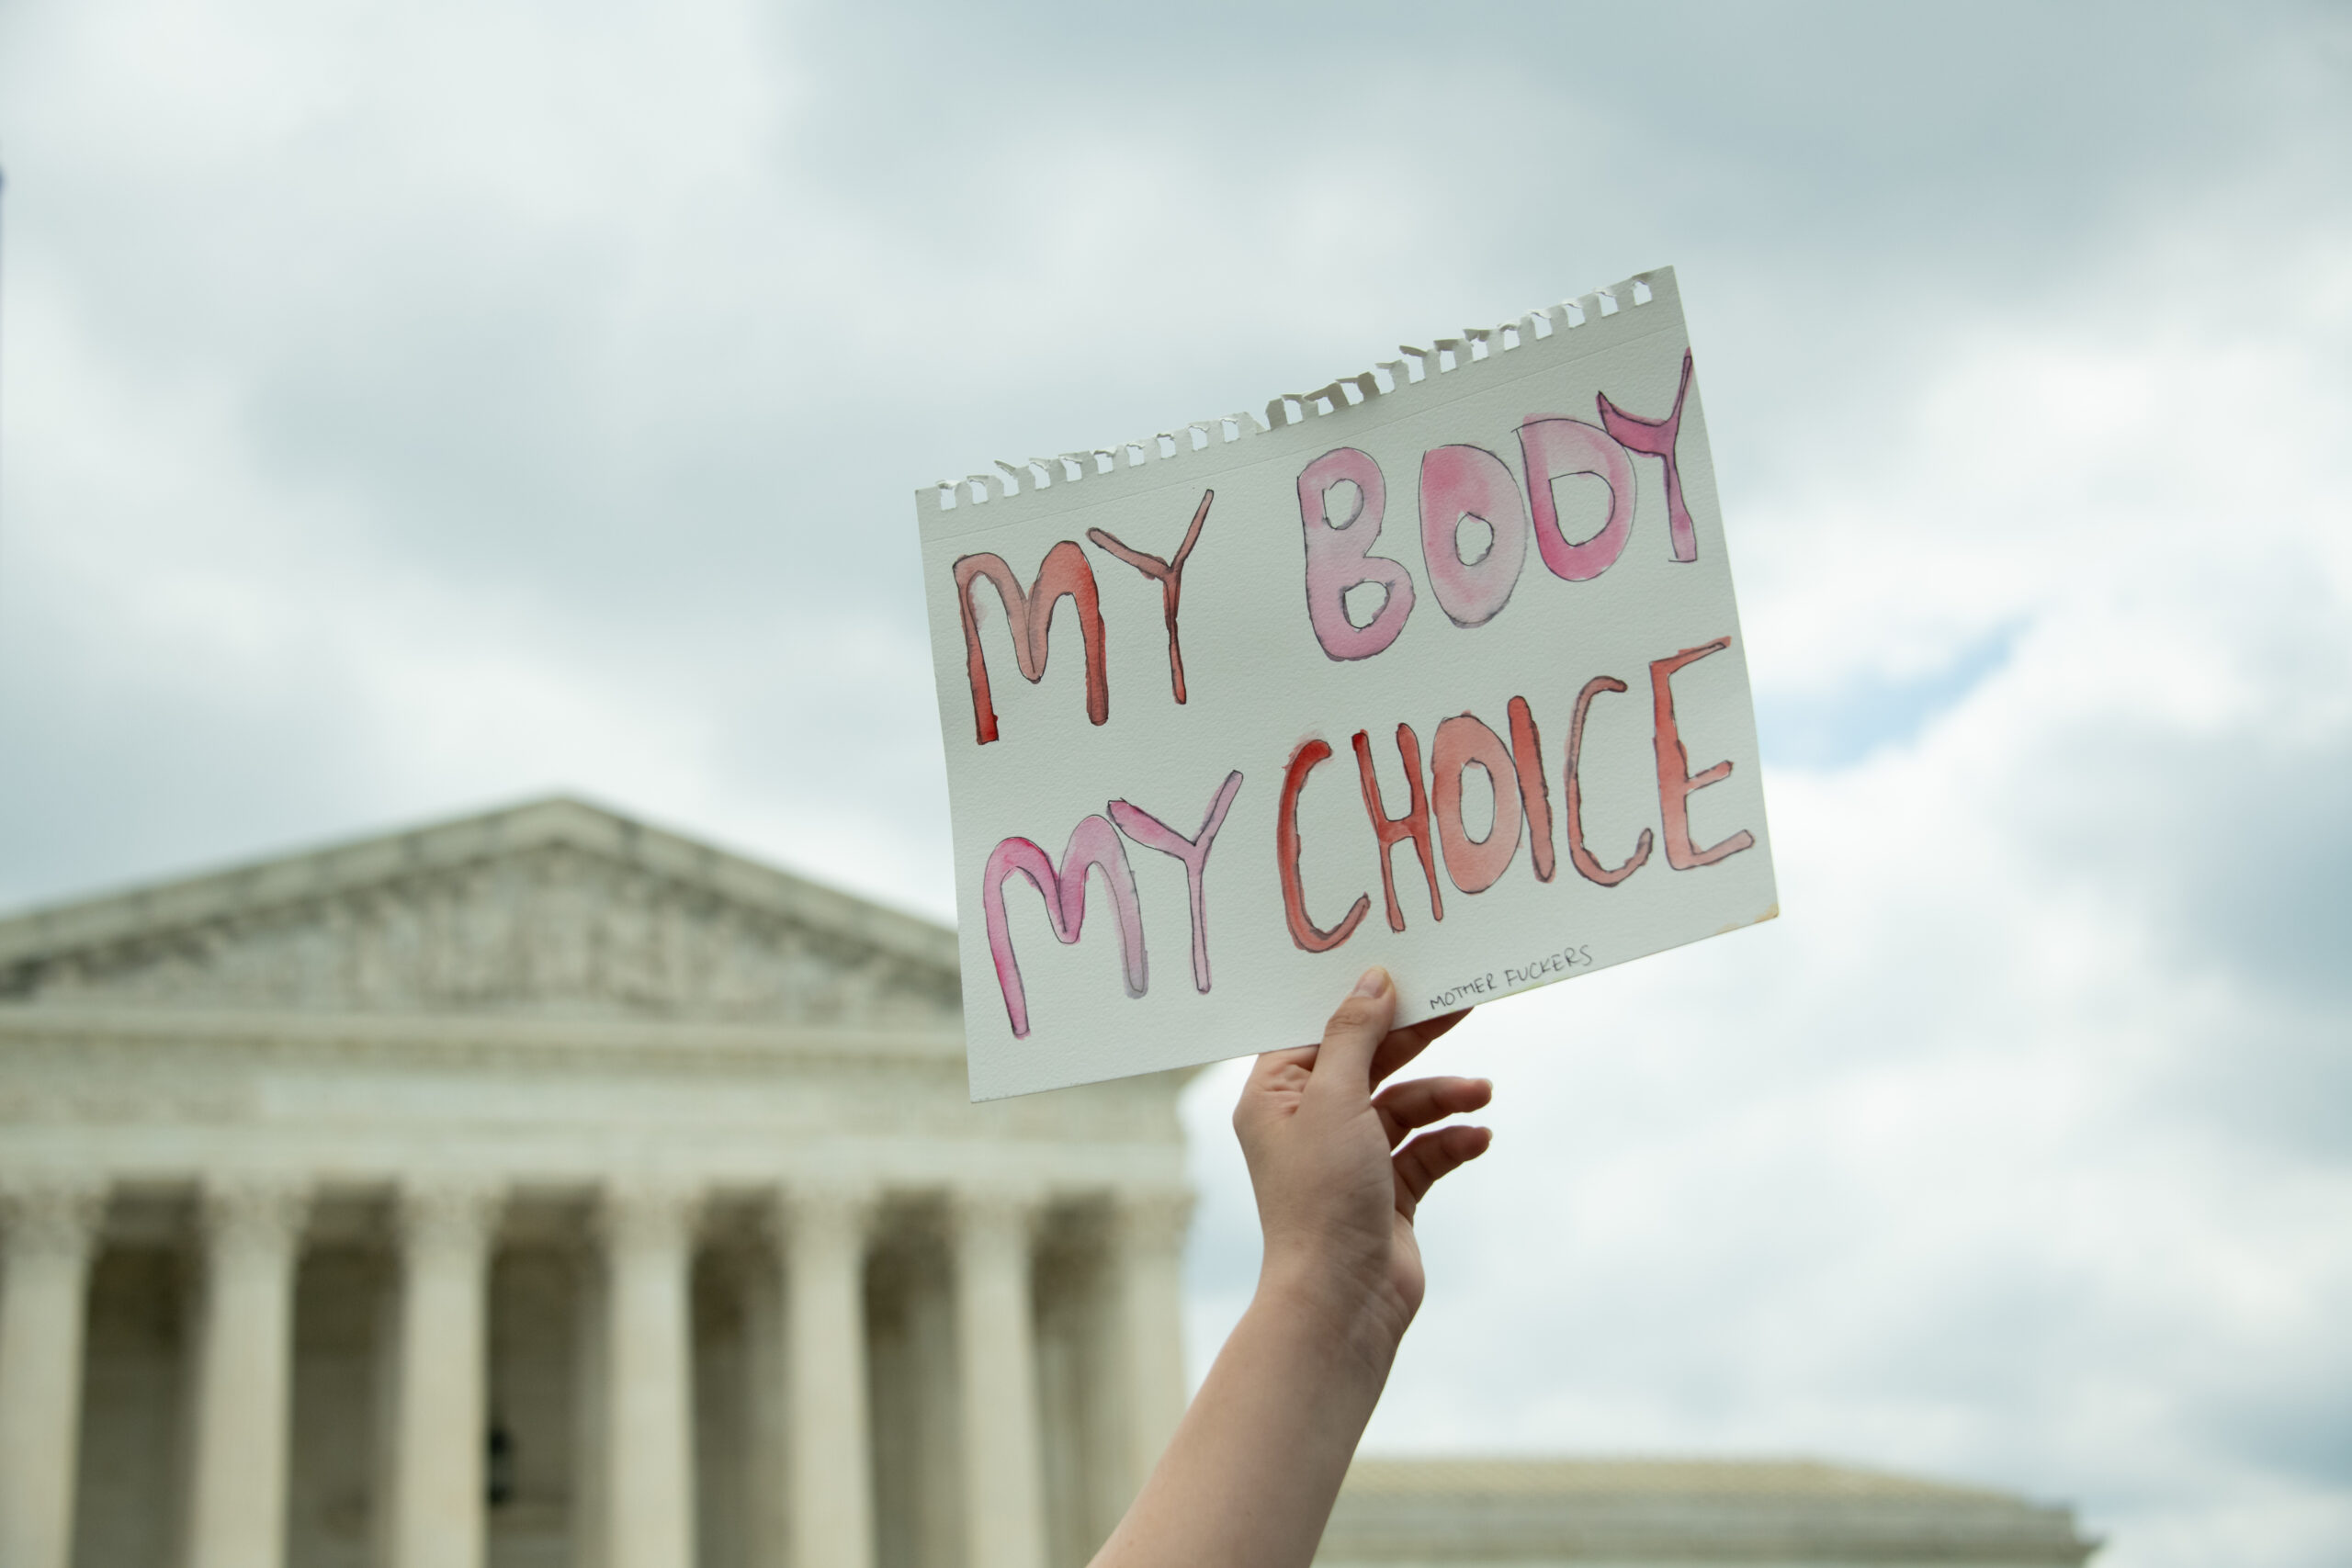 My Body, My Choice Roe v. Wade protest sign